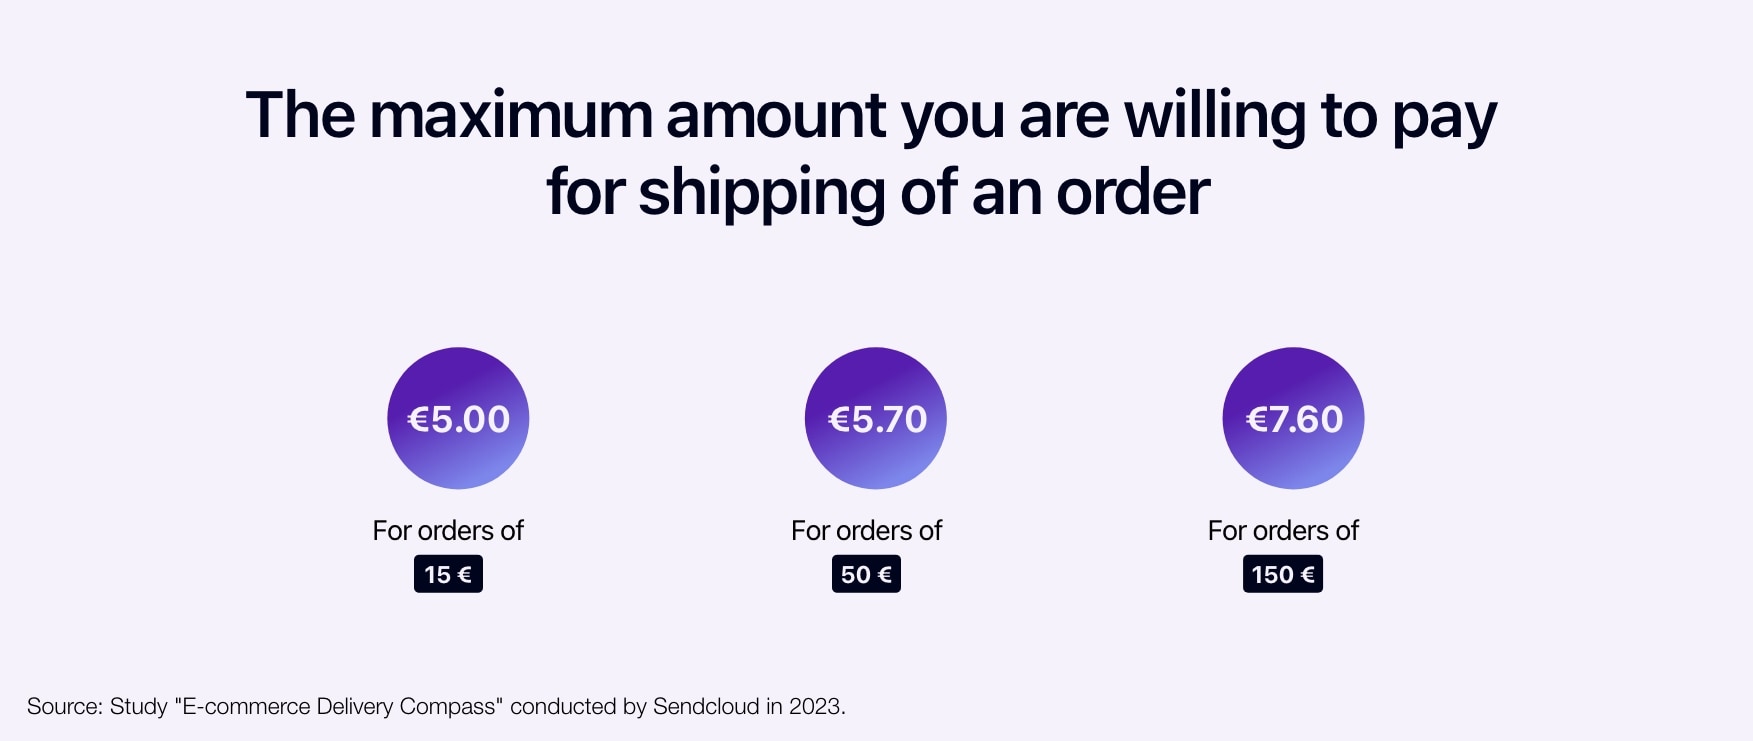 Diagram showing the maximum amount you are willing to pay for shipping of an order.